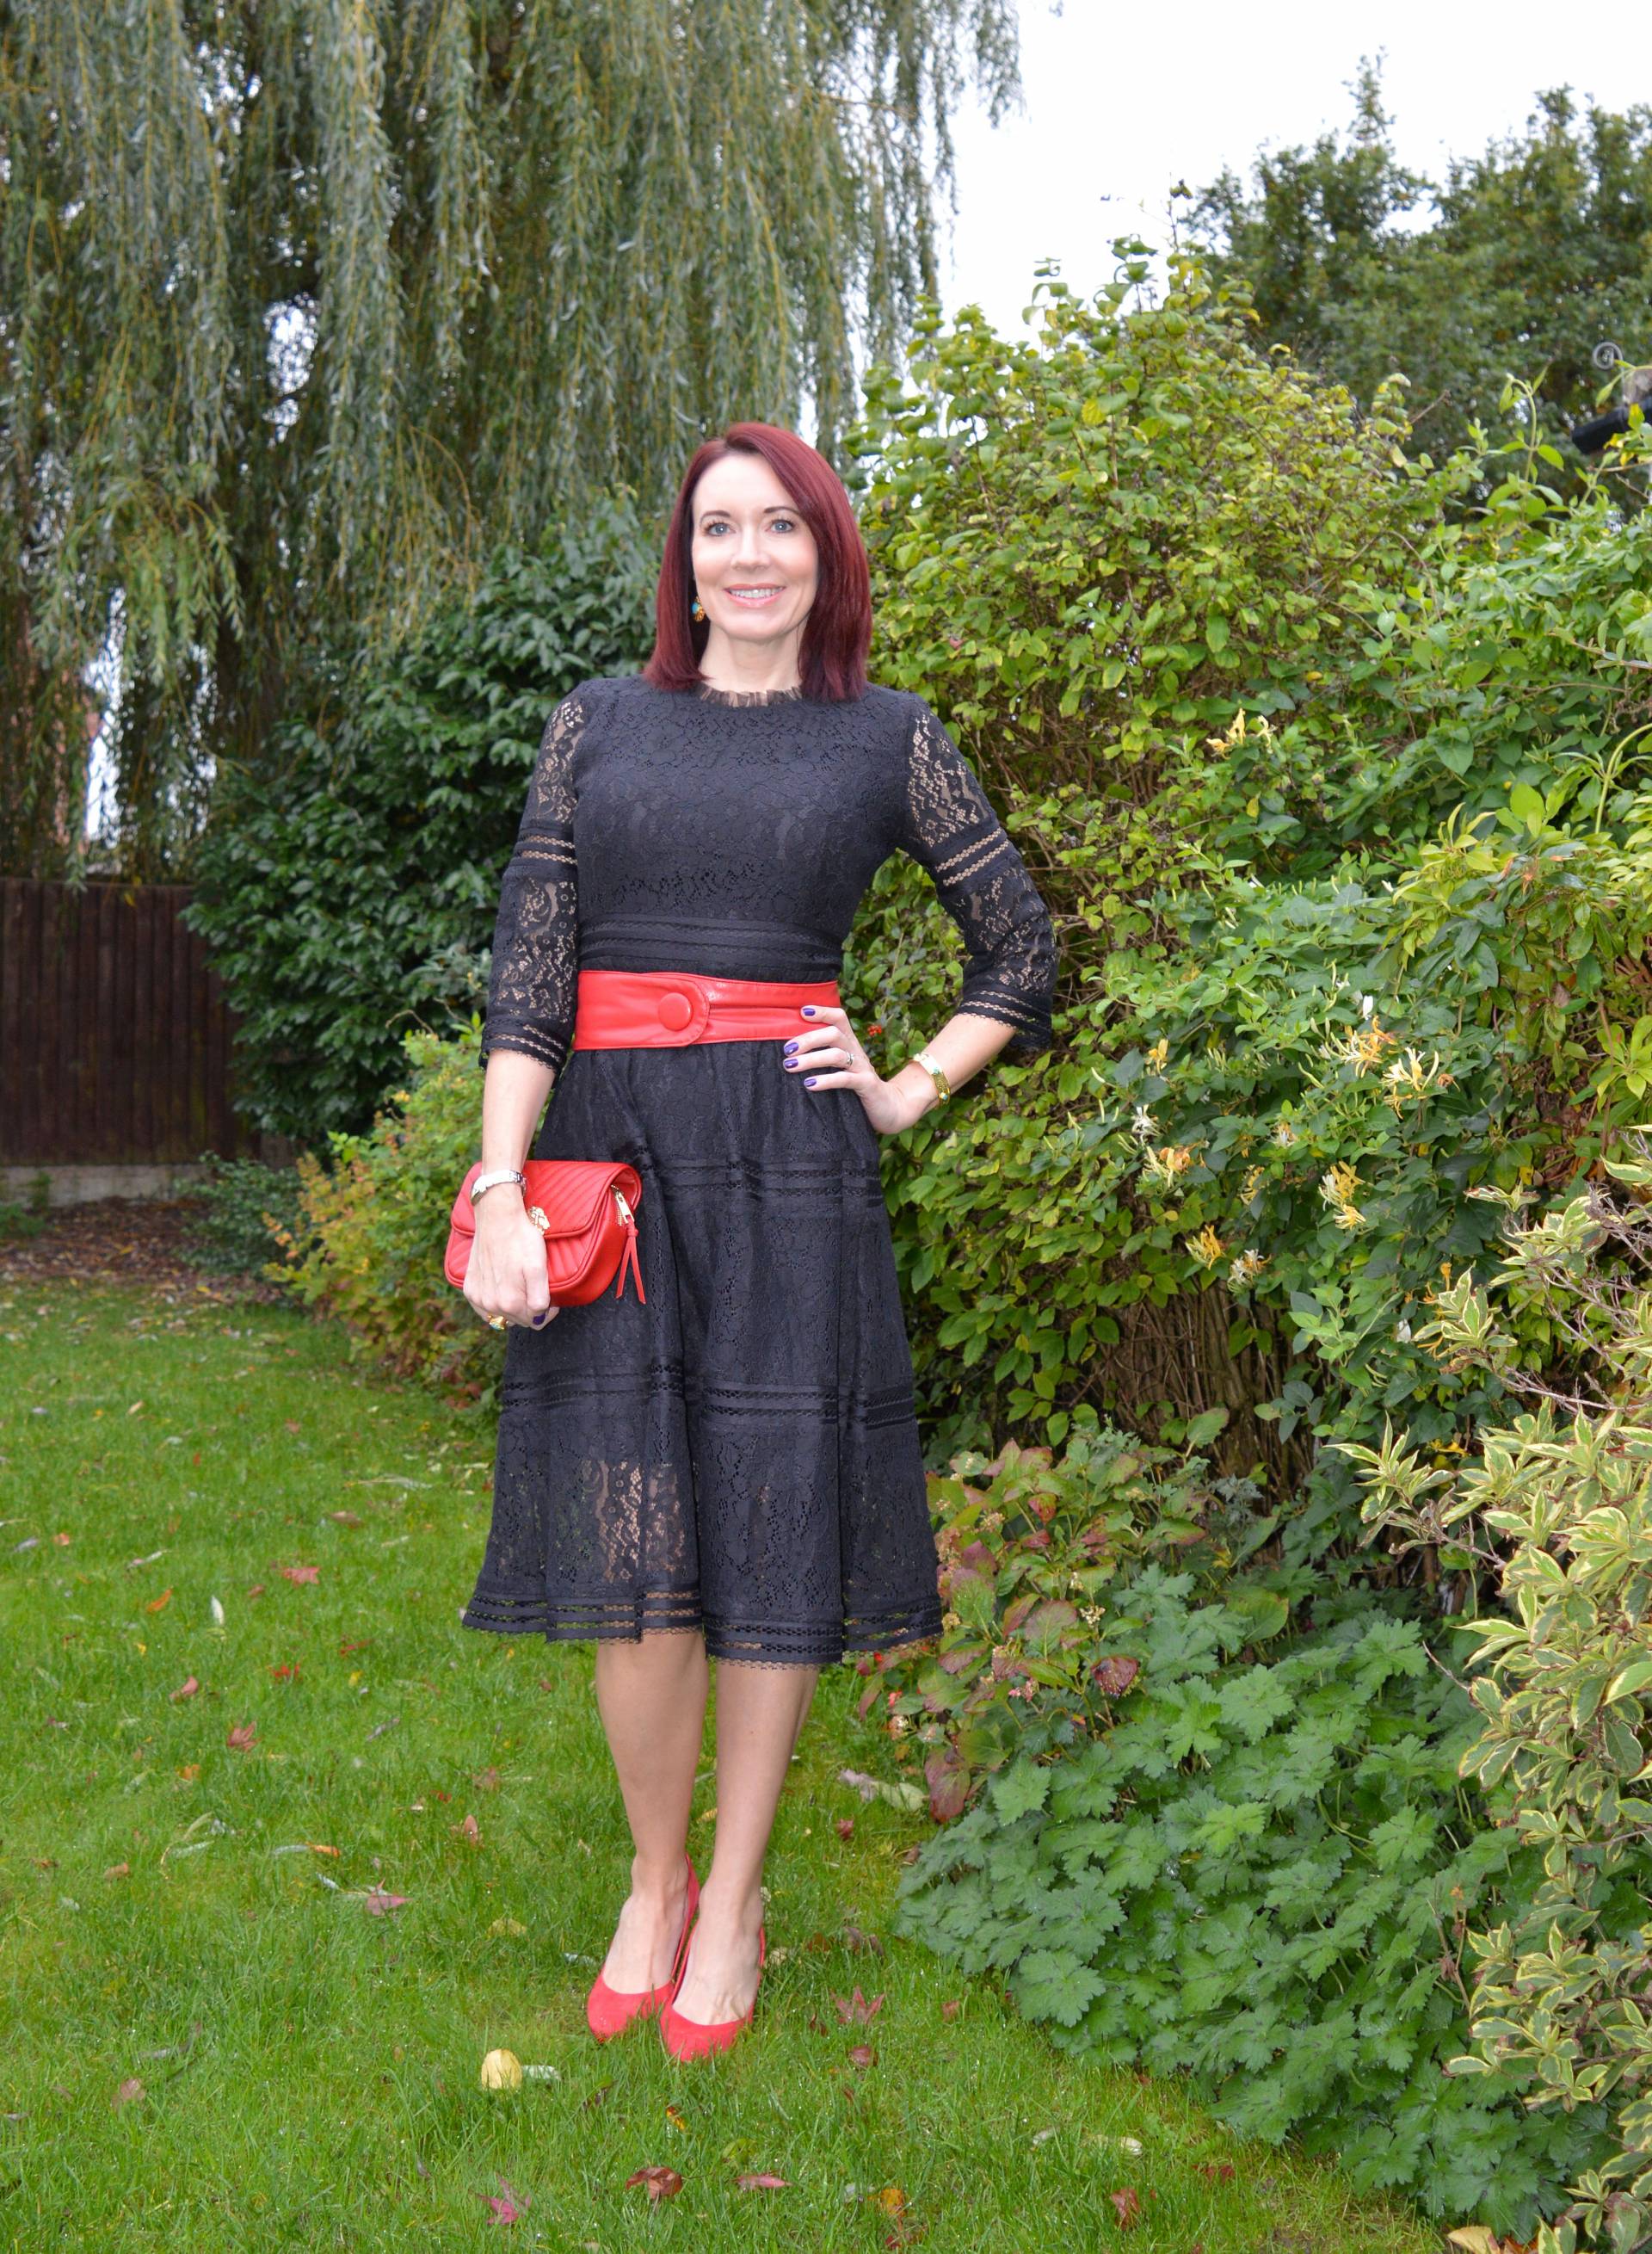 Black dress with red accessories link up